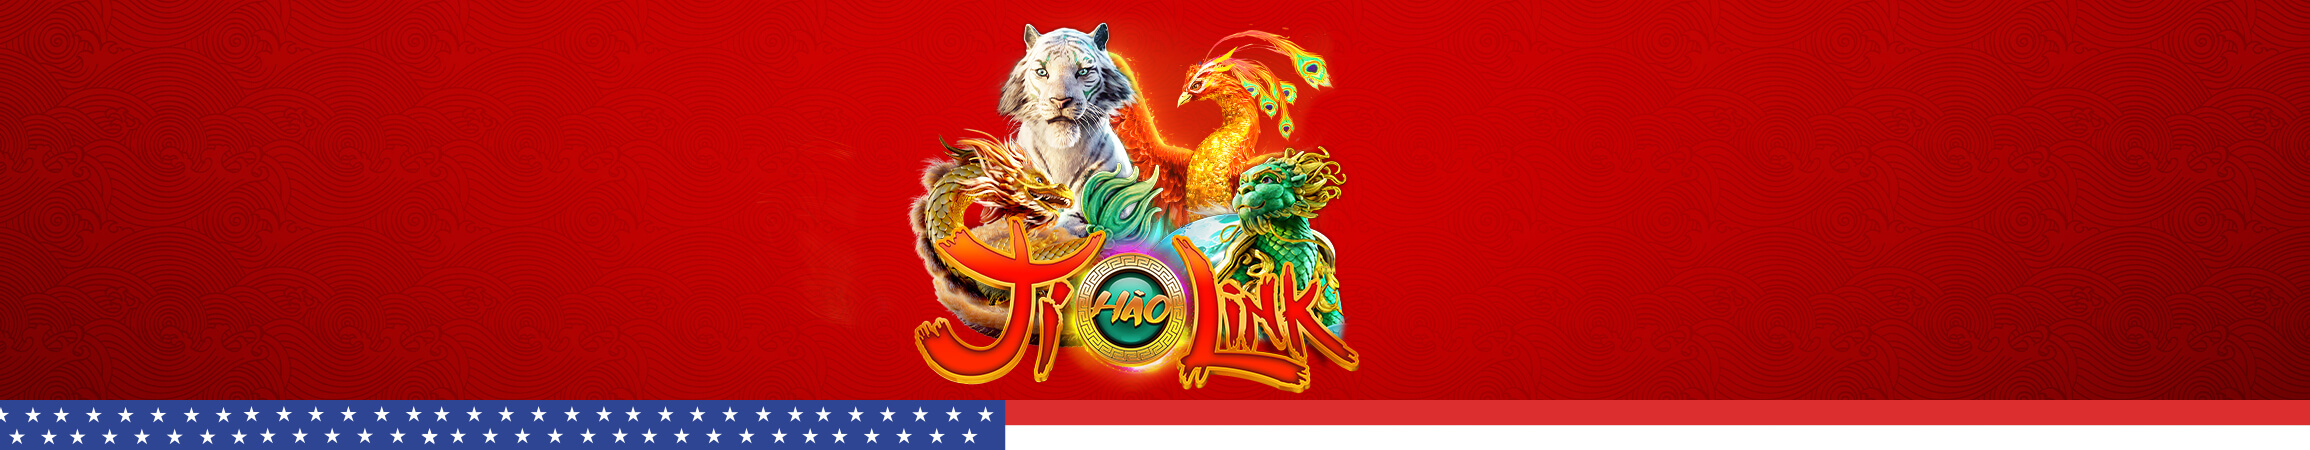 FBM® brings Asian fortune to the United States with Jí Hǎo Link™